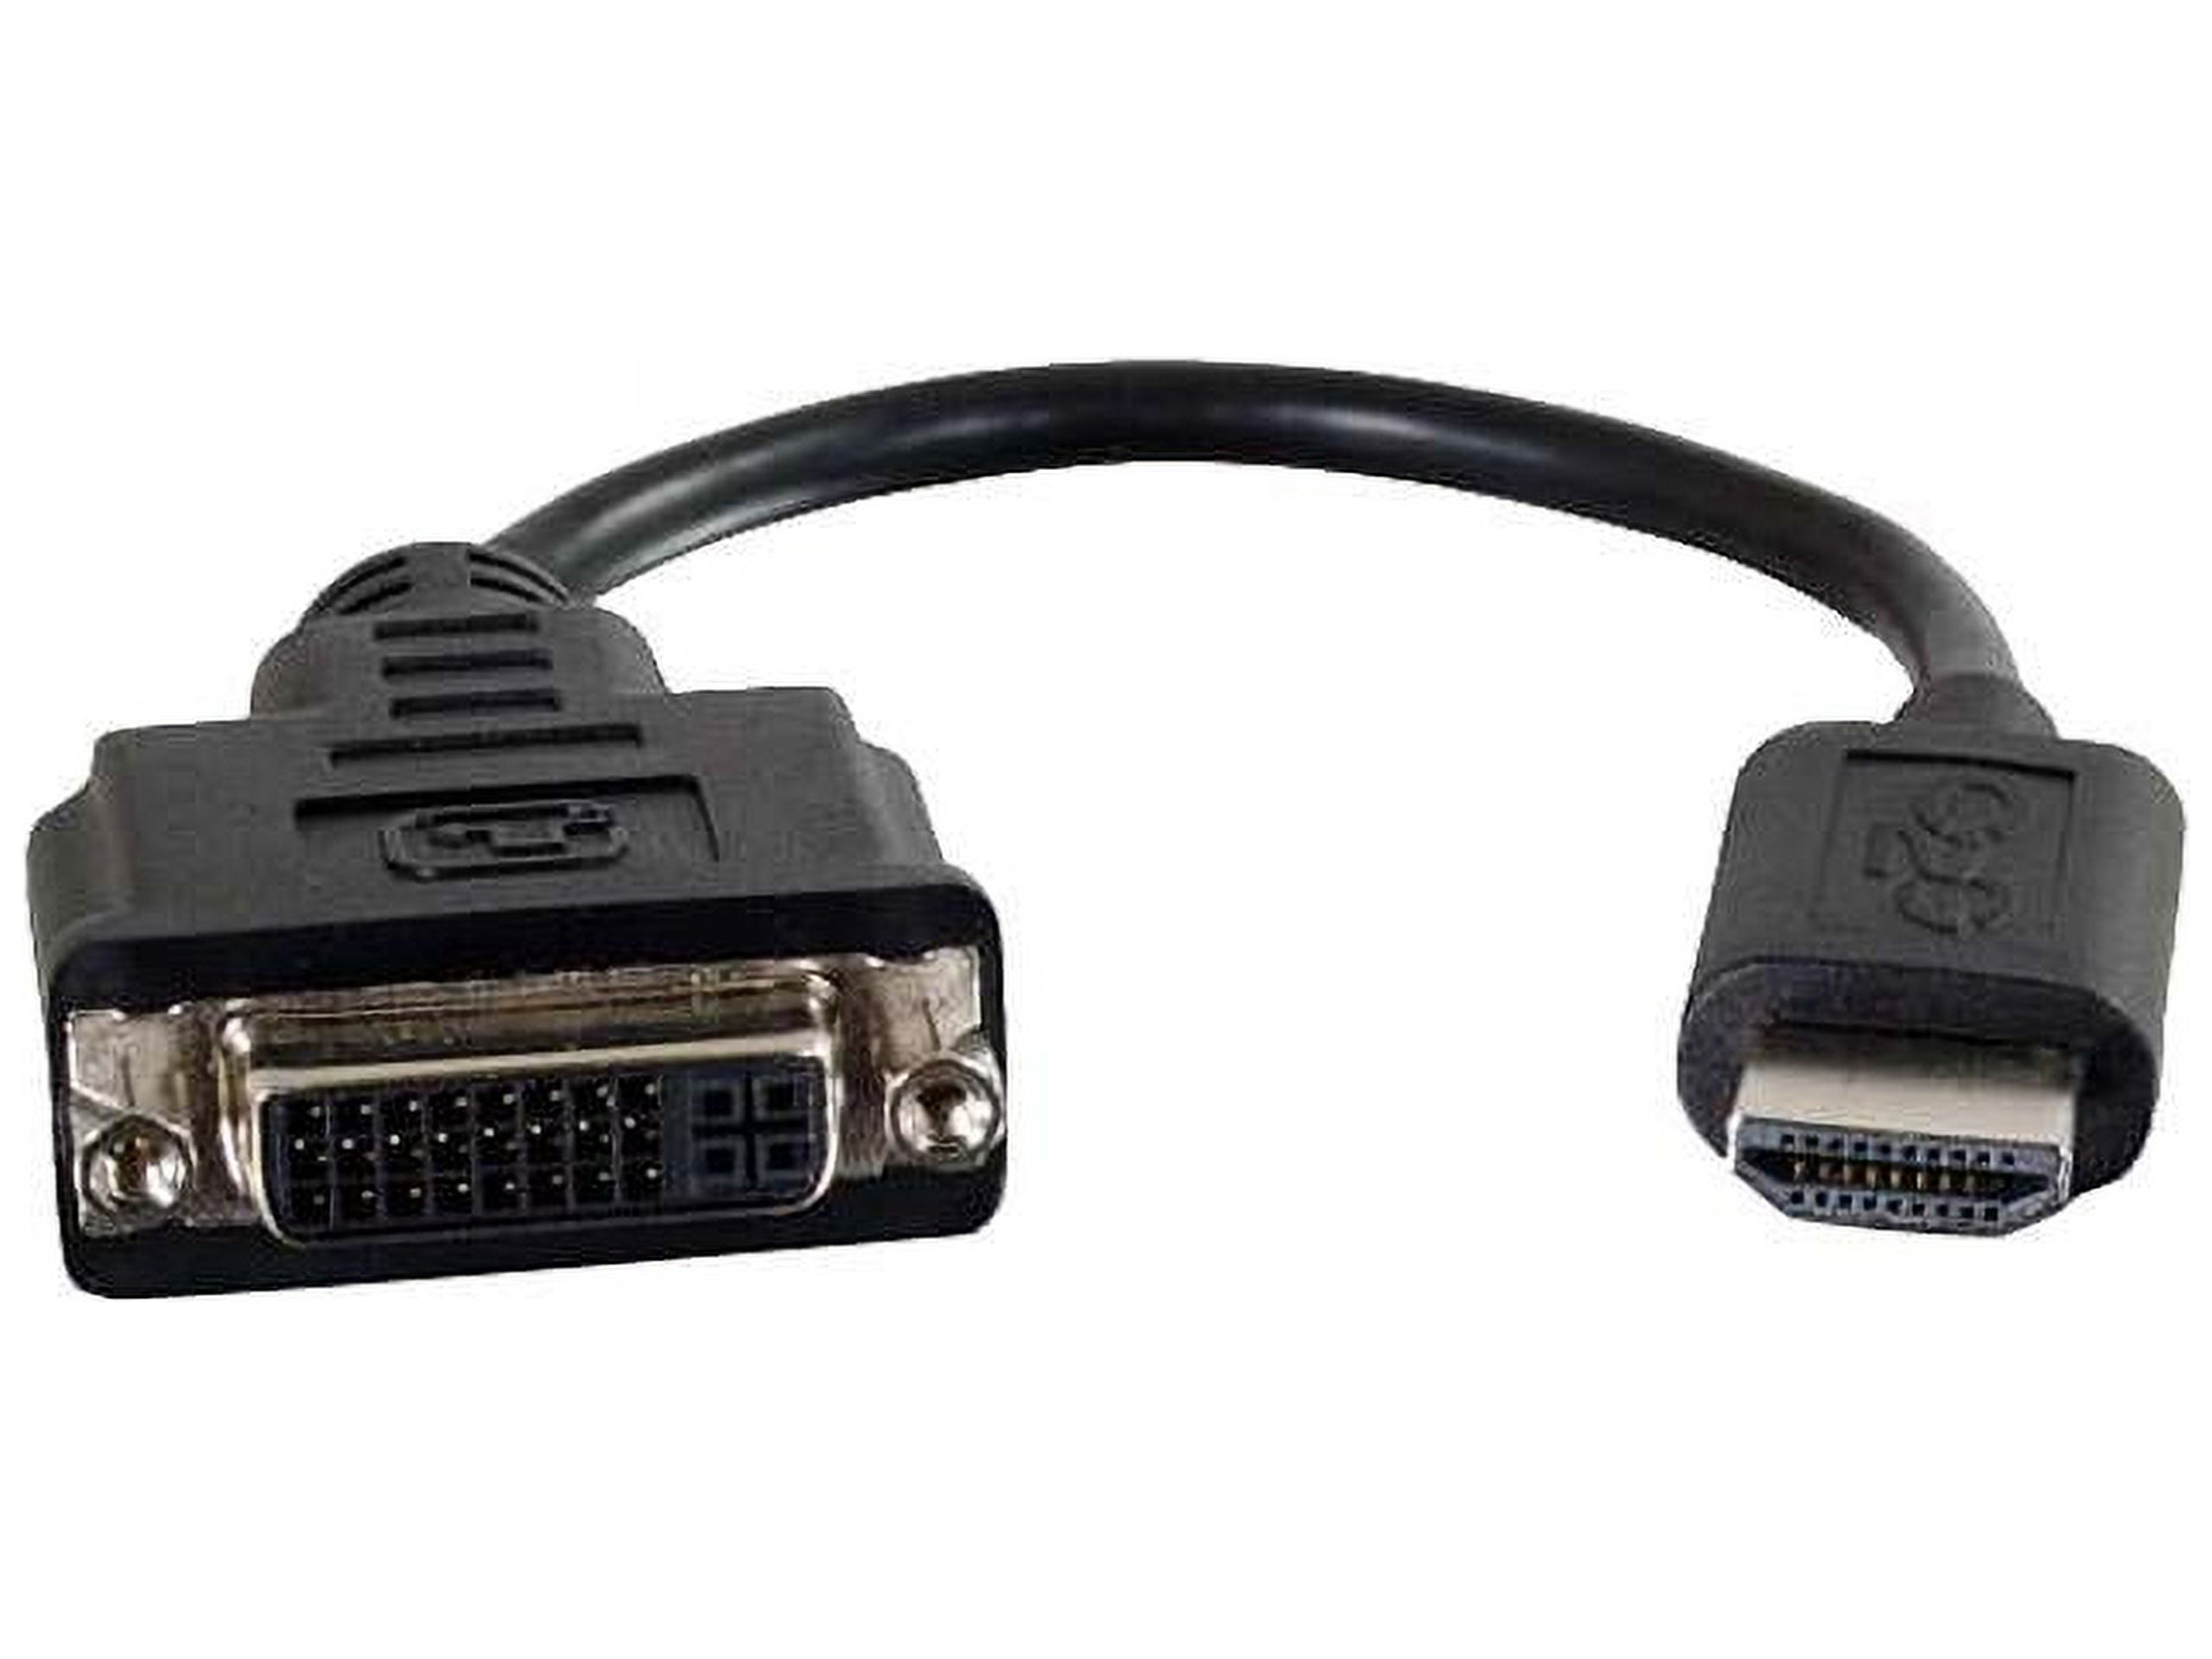 C2g 8In Hdmi To Dvi Adapter Converter Dongle - M/F Black - image 1 of 3